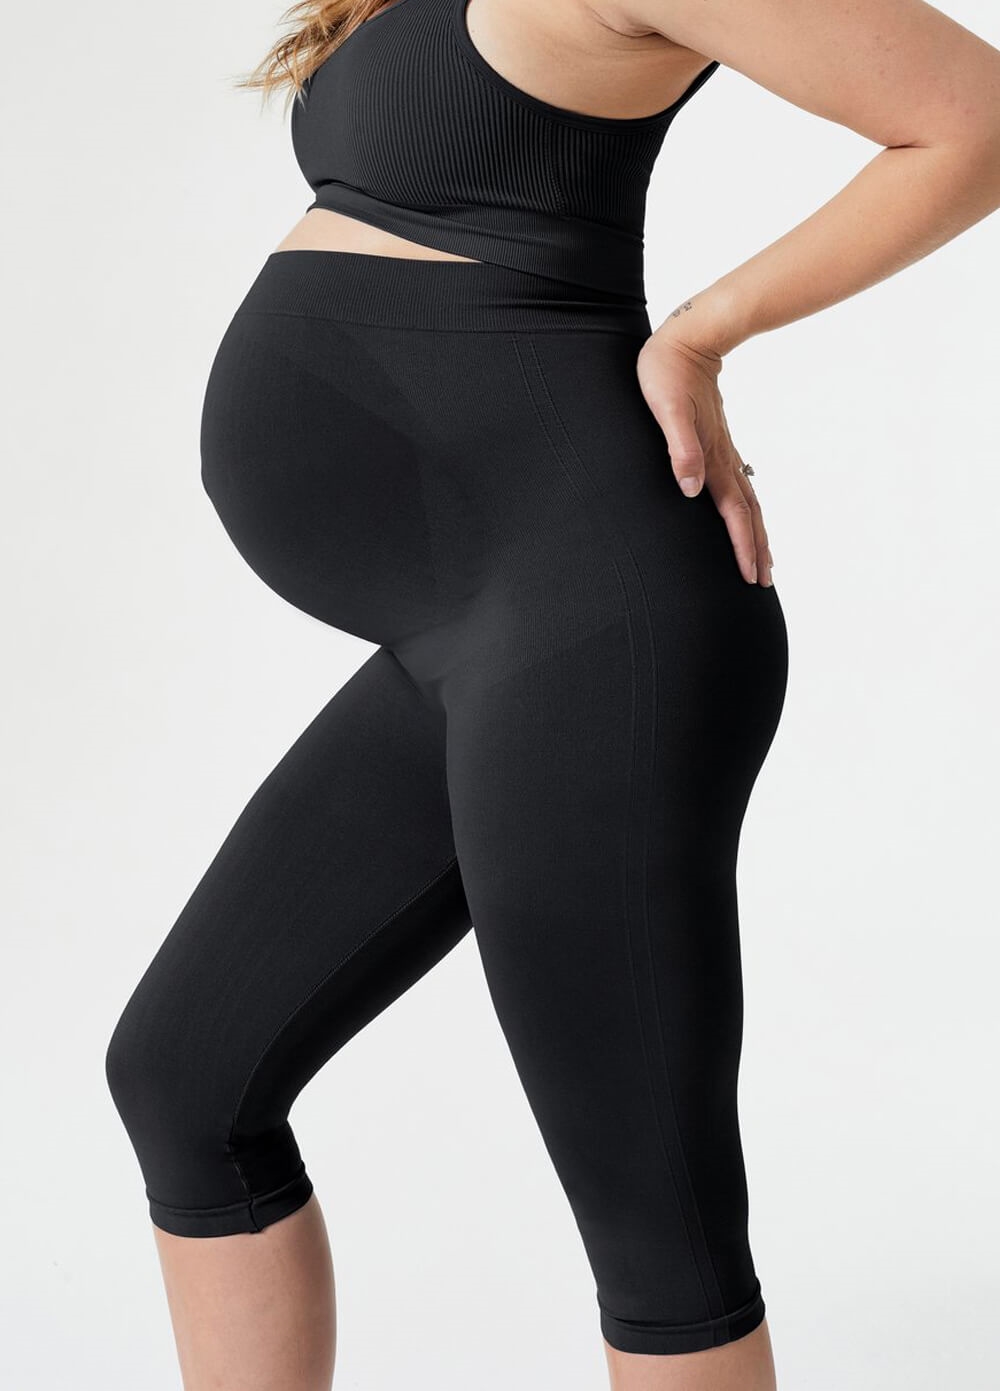 Blanqi Maternity Leggings  Maternity leggings, Belly support band, Belly  support